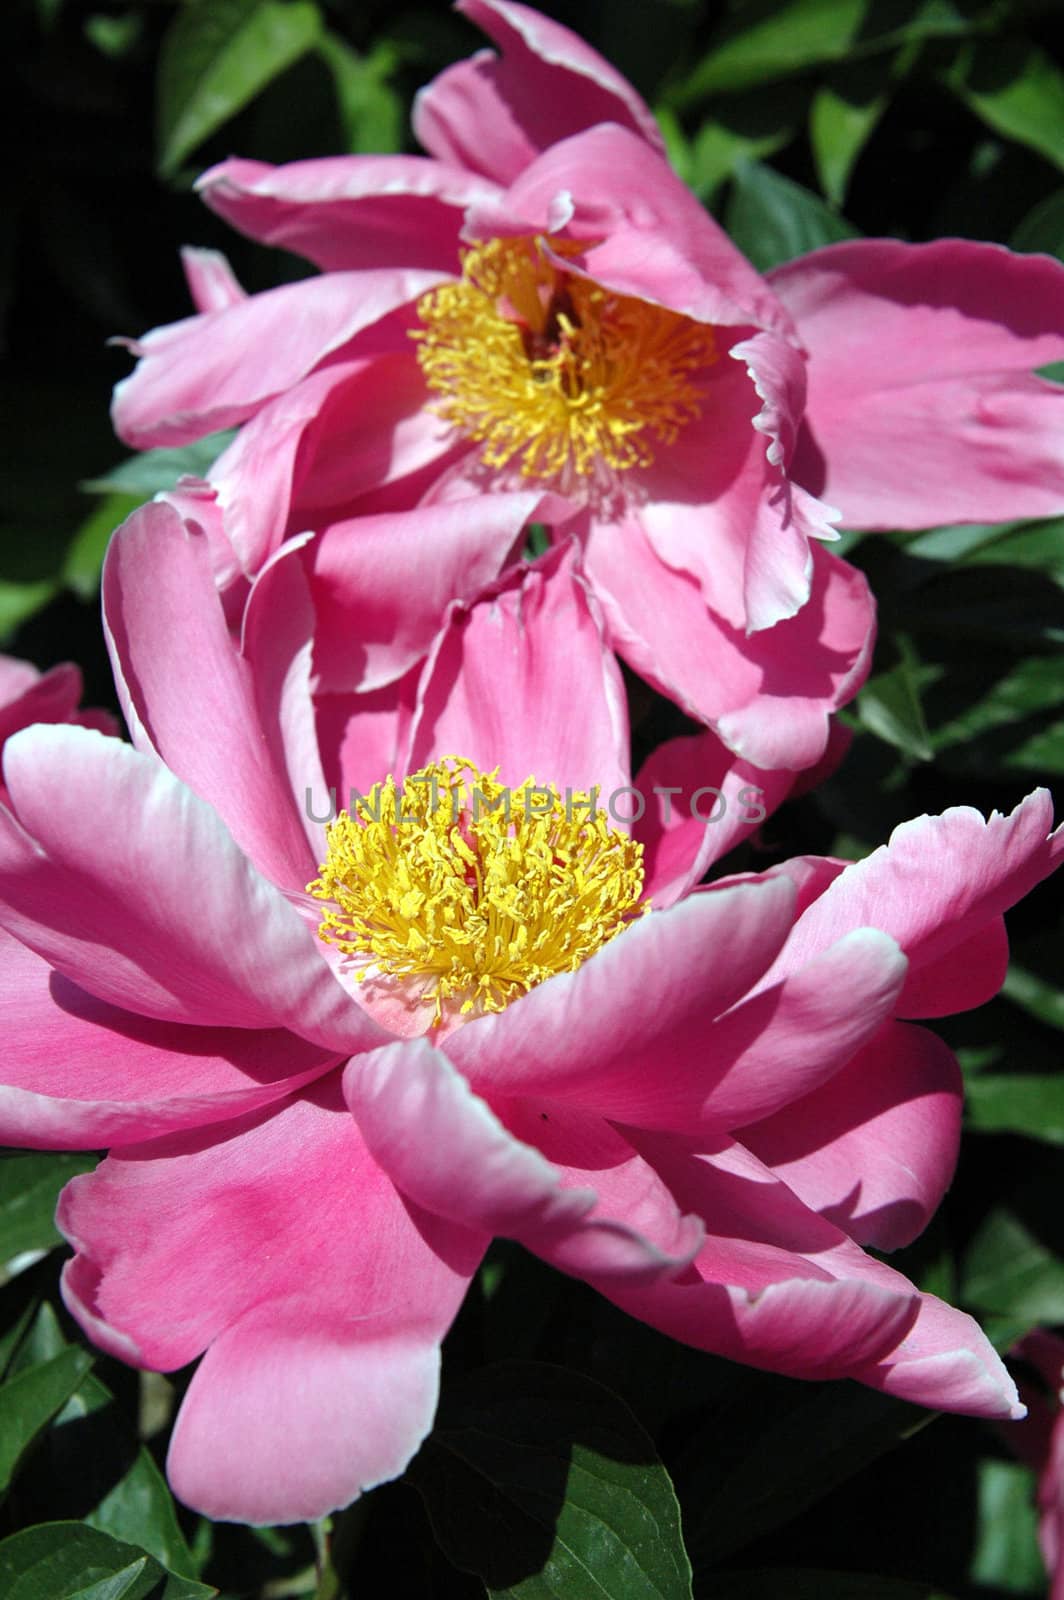 The peony flowers in full bloom